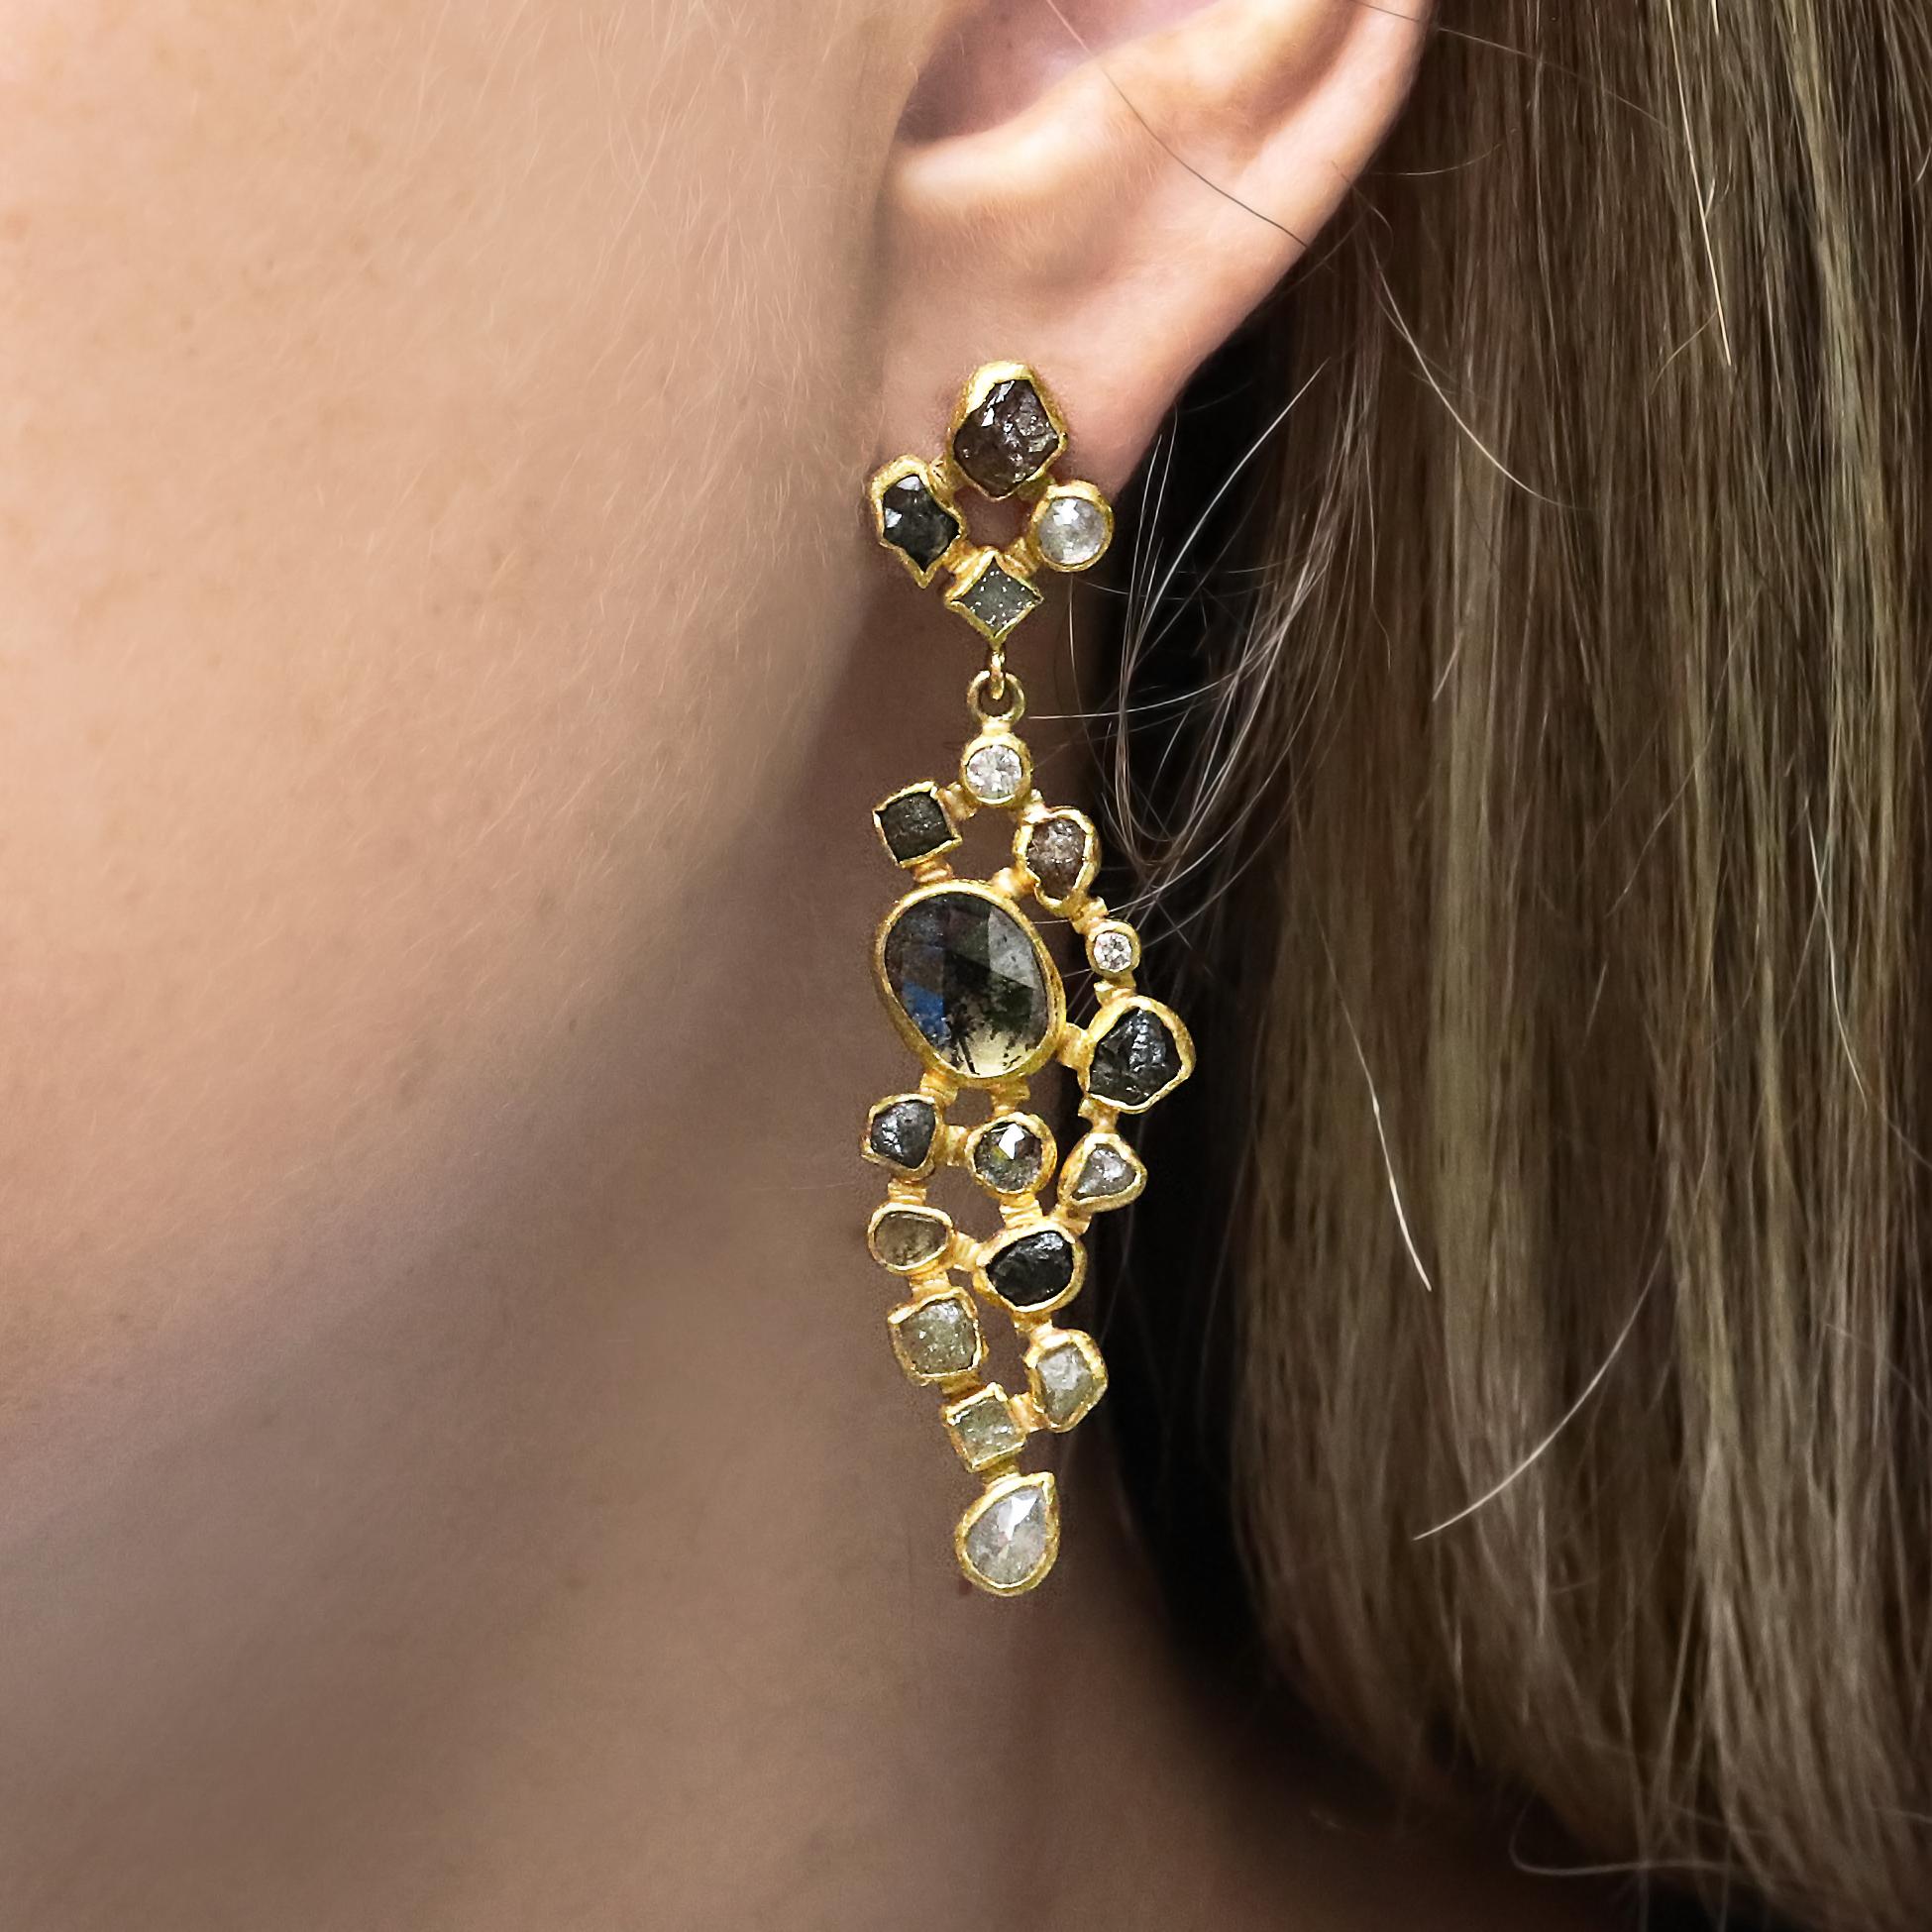 One of a Kind Mosaic Diamond Drop Earrings hand-fabricated by jewelry maker Petra Class featuring 10.04 total carats of assorted brilliant-cut, faceted, rose-cut, and rough diamonds, all bezel-set in signature-finished 22k yellow gold on 18k yellow